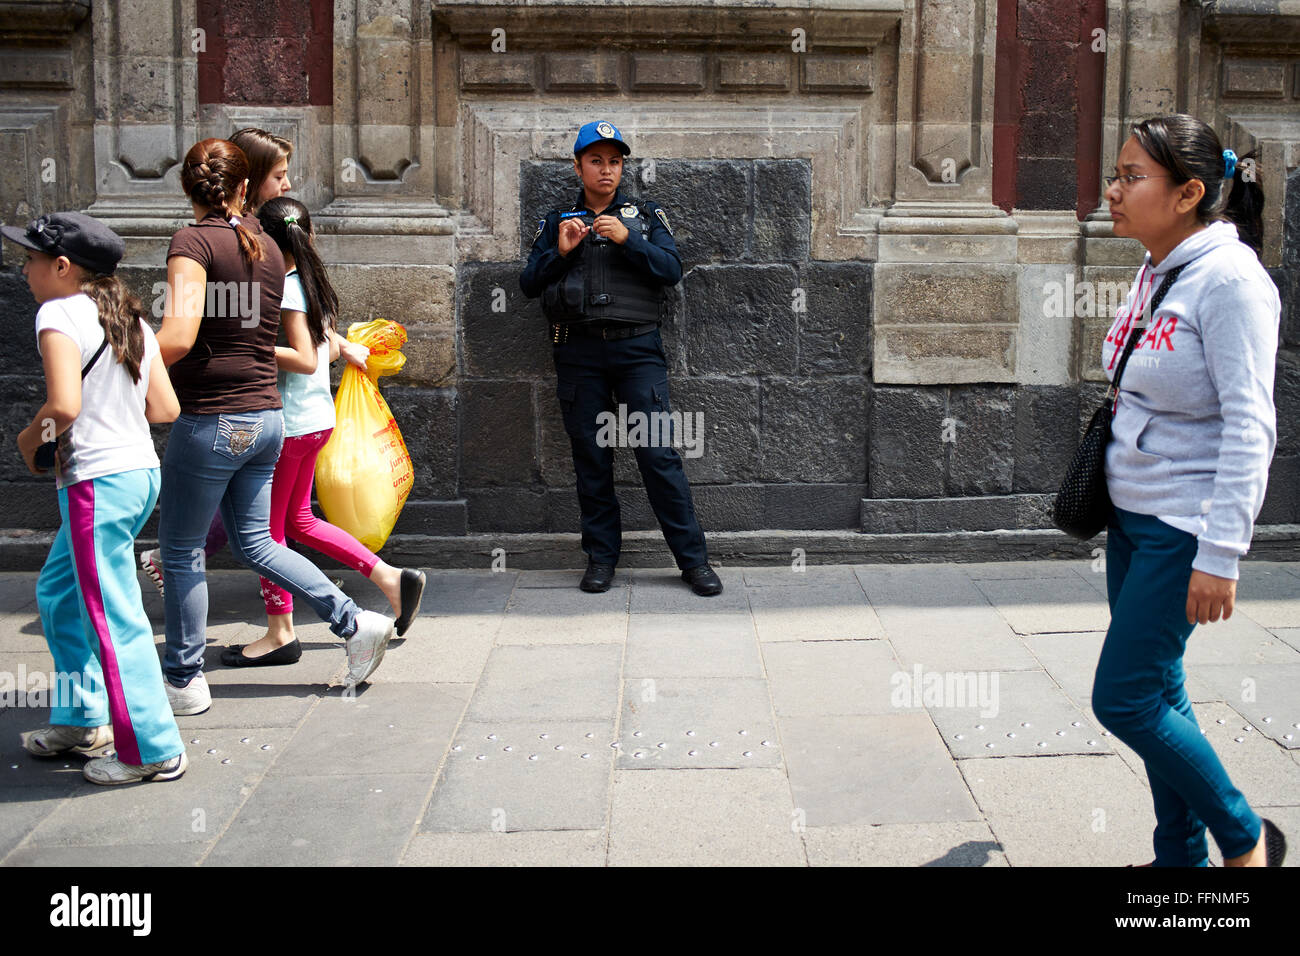 Mexican police cleans her fingernails while passersby walk past Stock Photo